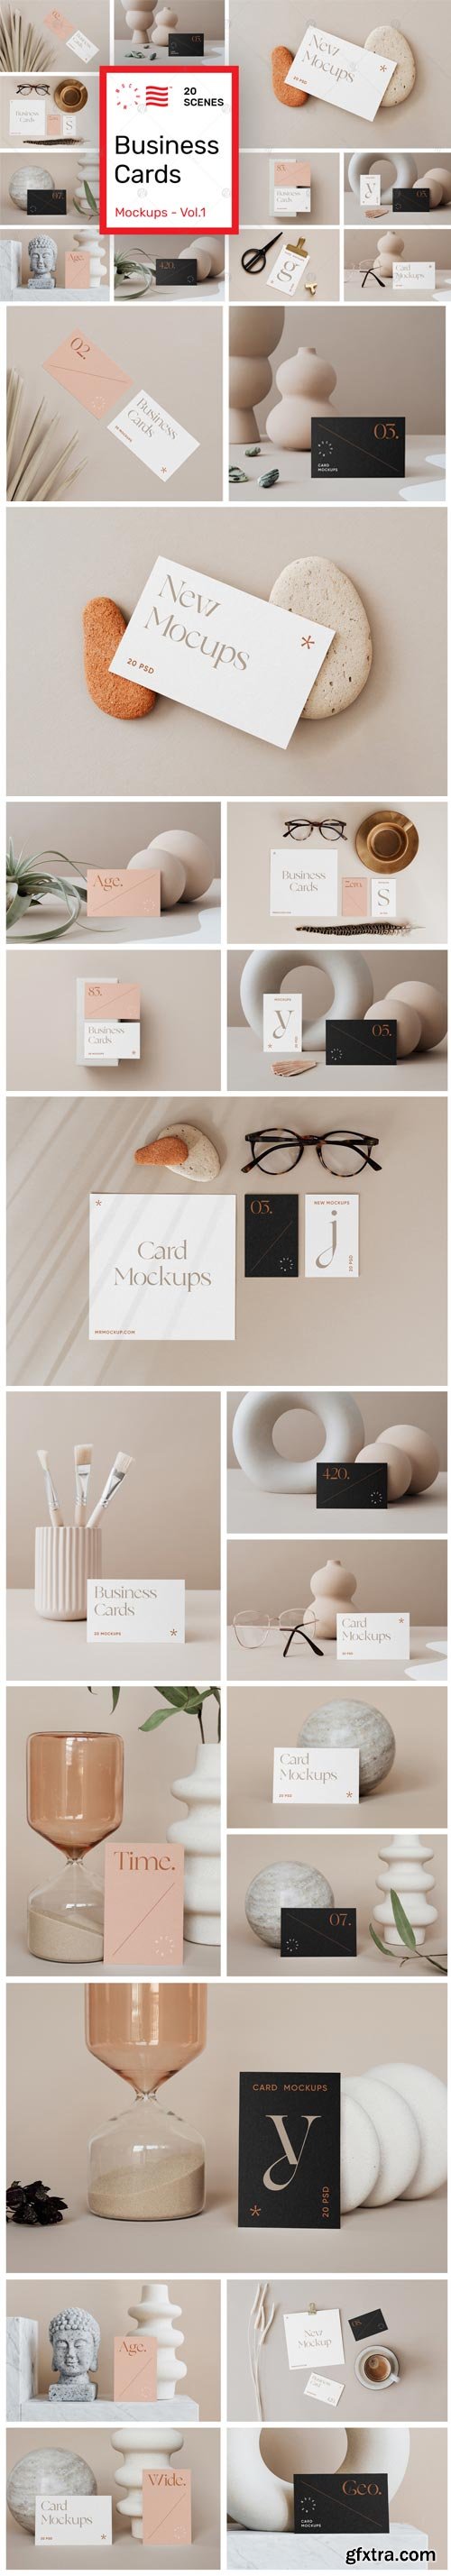 YellowImages - Business Card Mockups Vol.1 - 83760